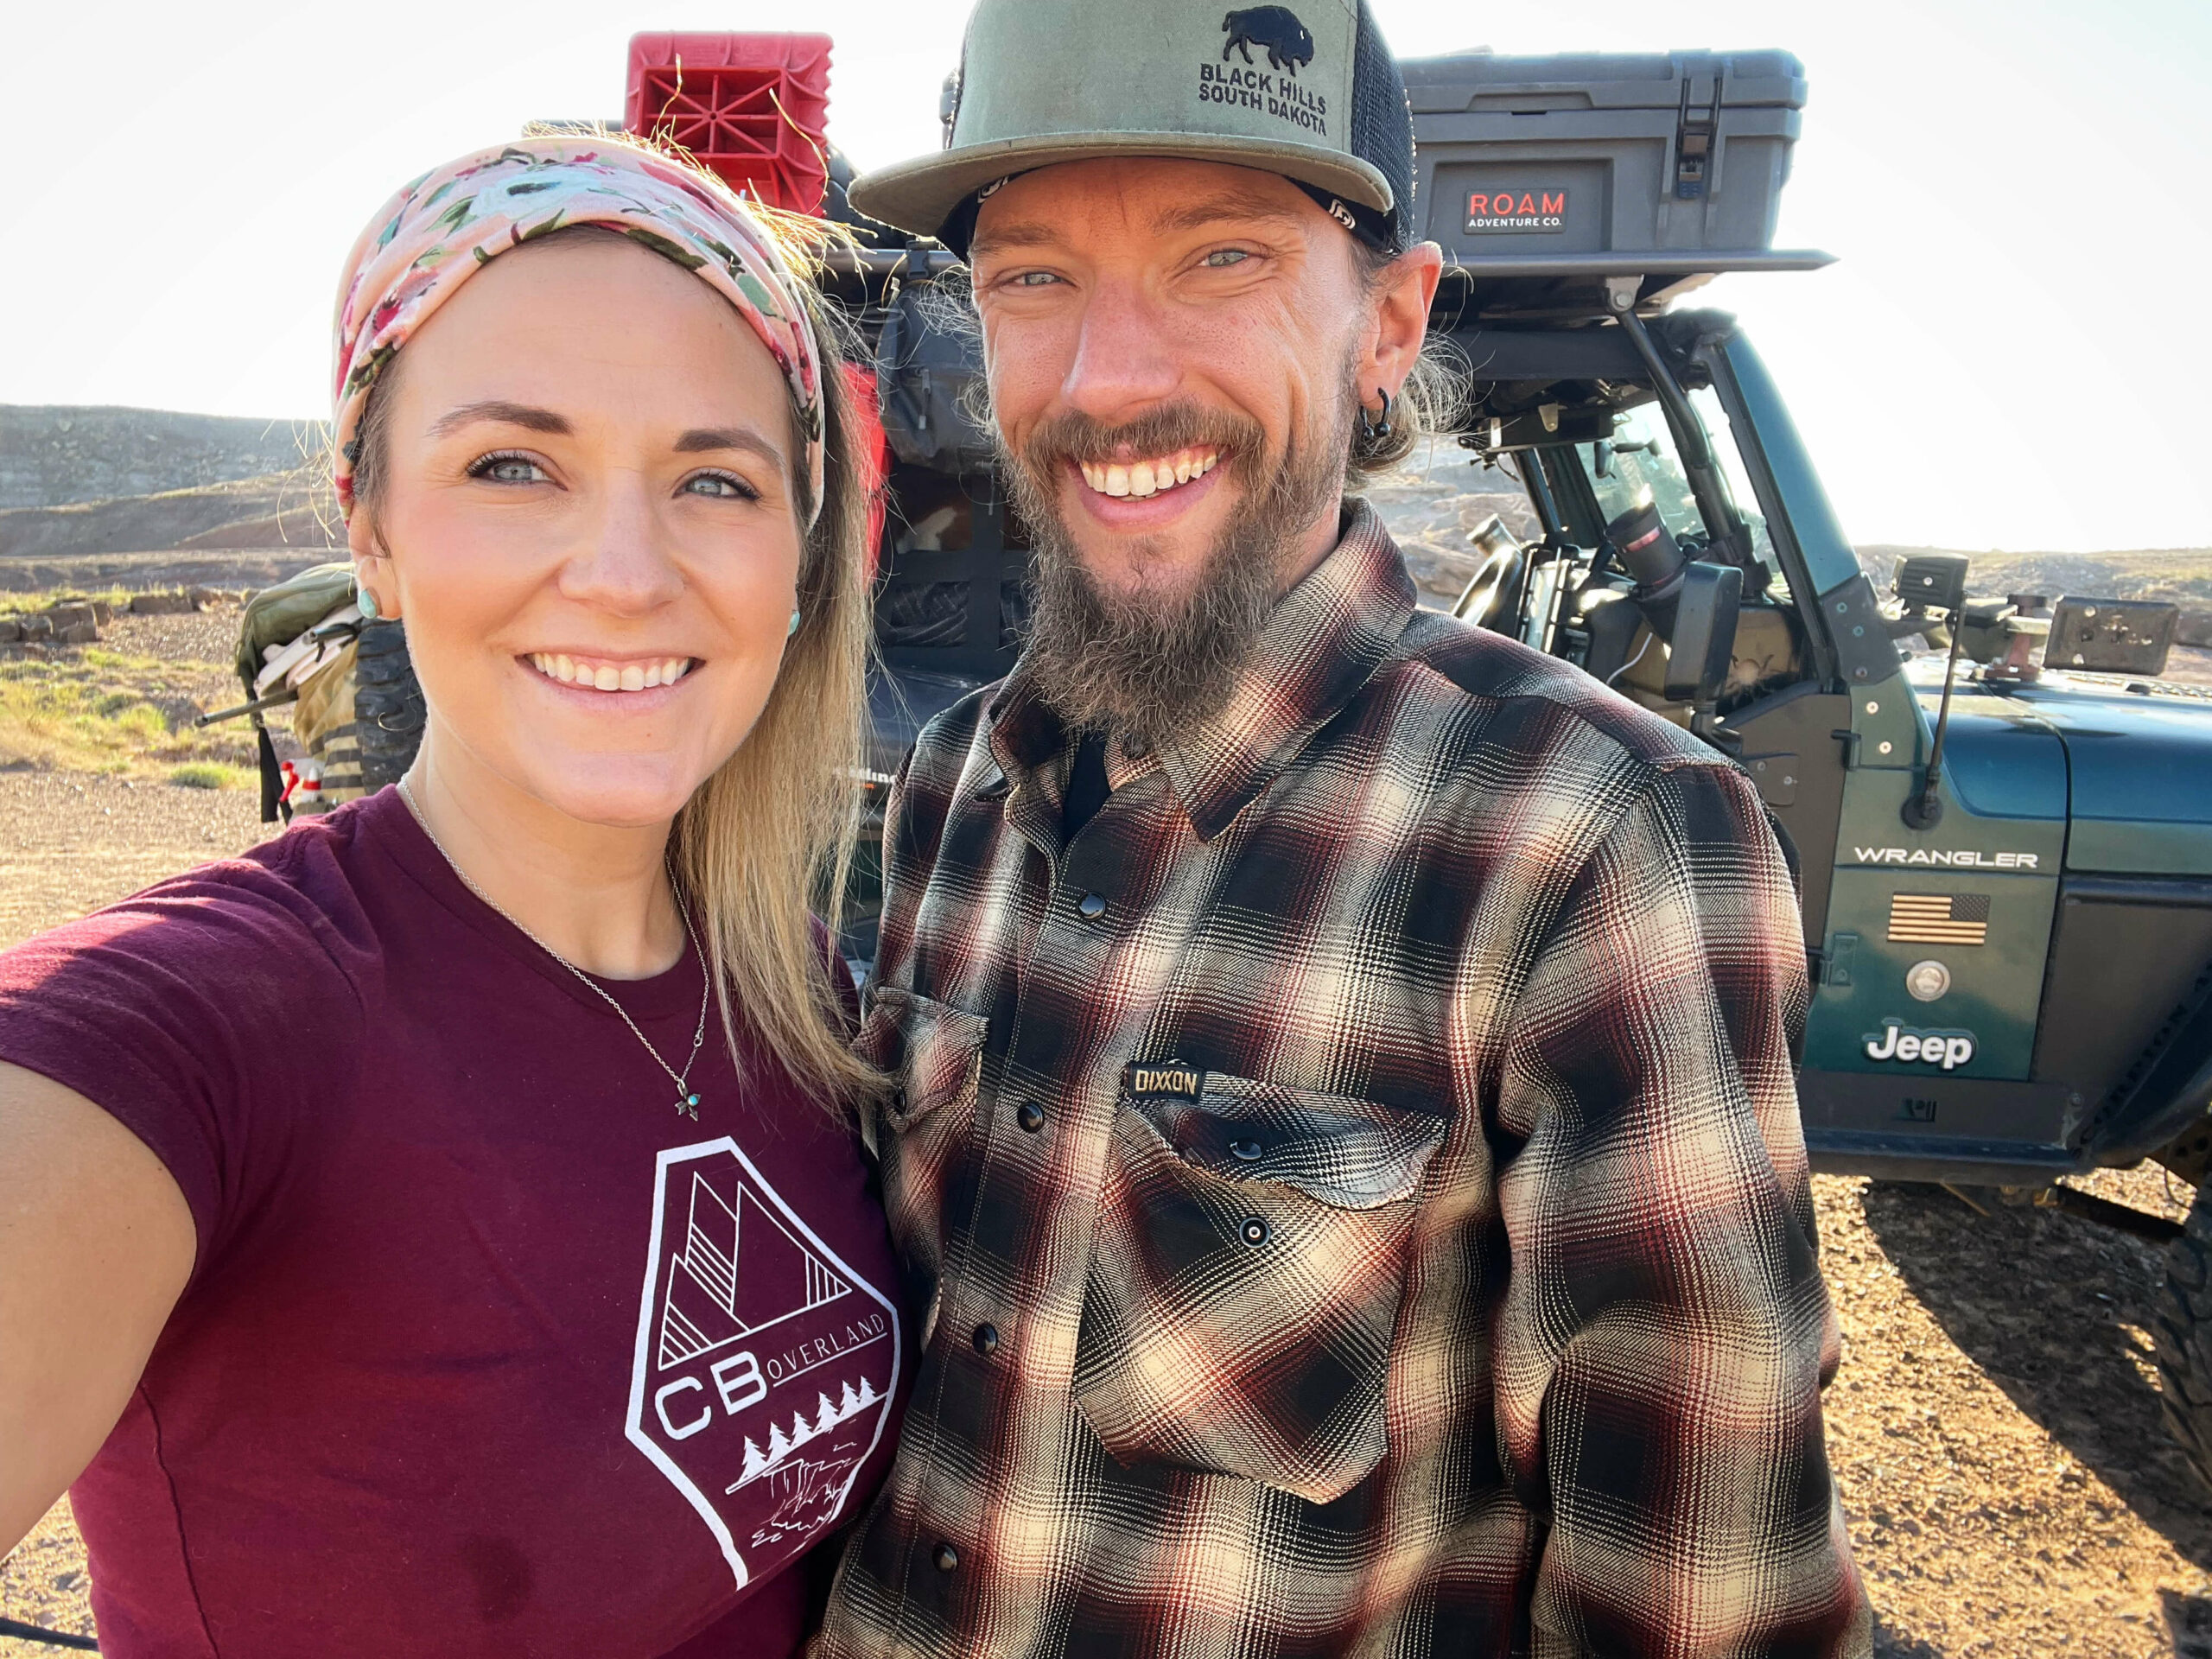 Chelsea and Blake stand in front of their overlanding jeep.